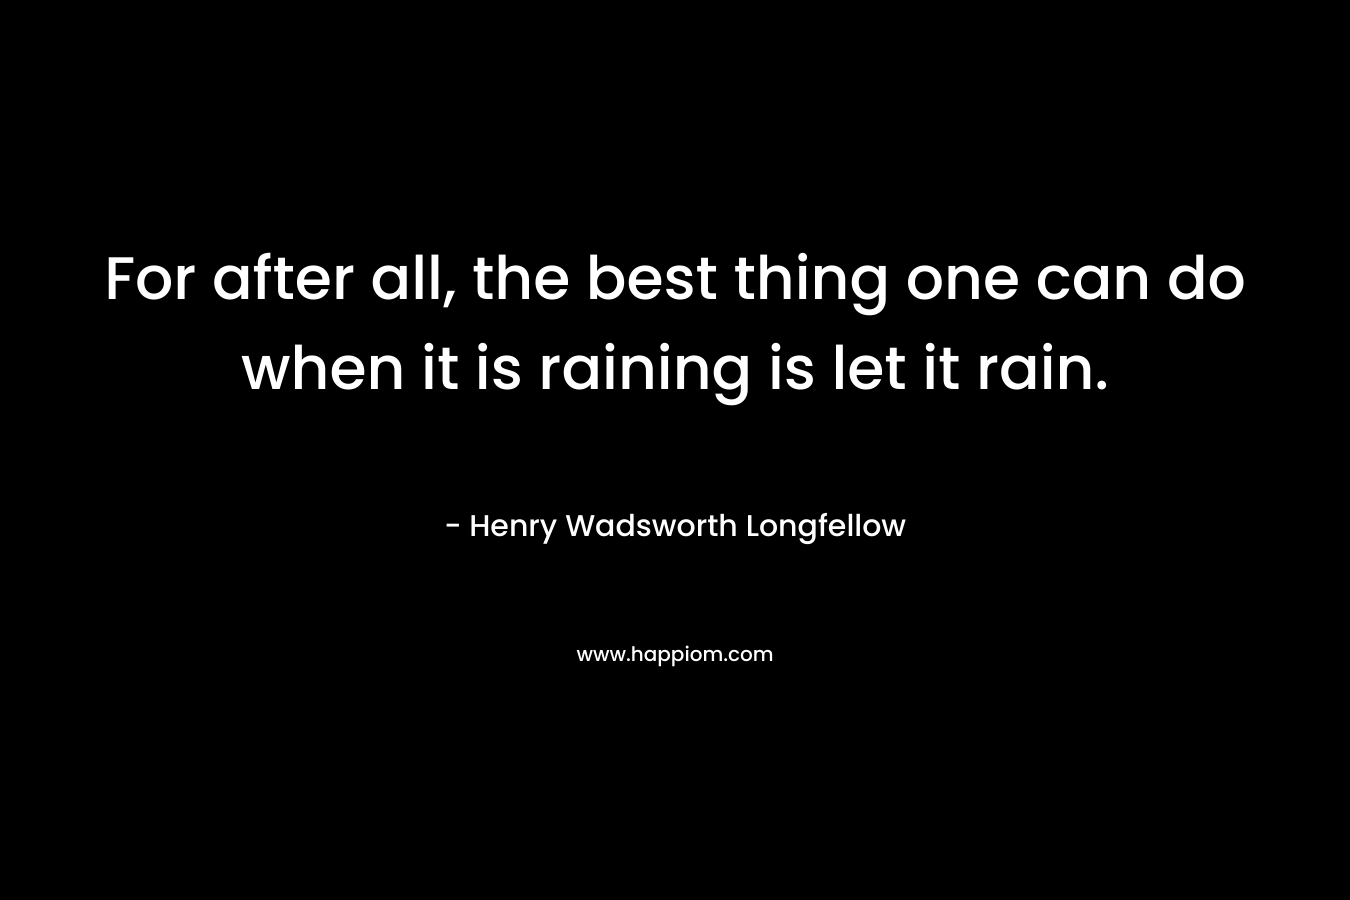 For after all, the best thing one can do when it is raining is let it rain.